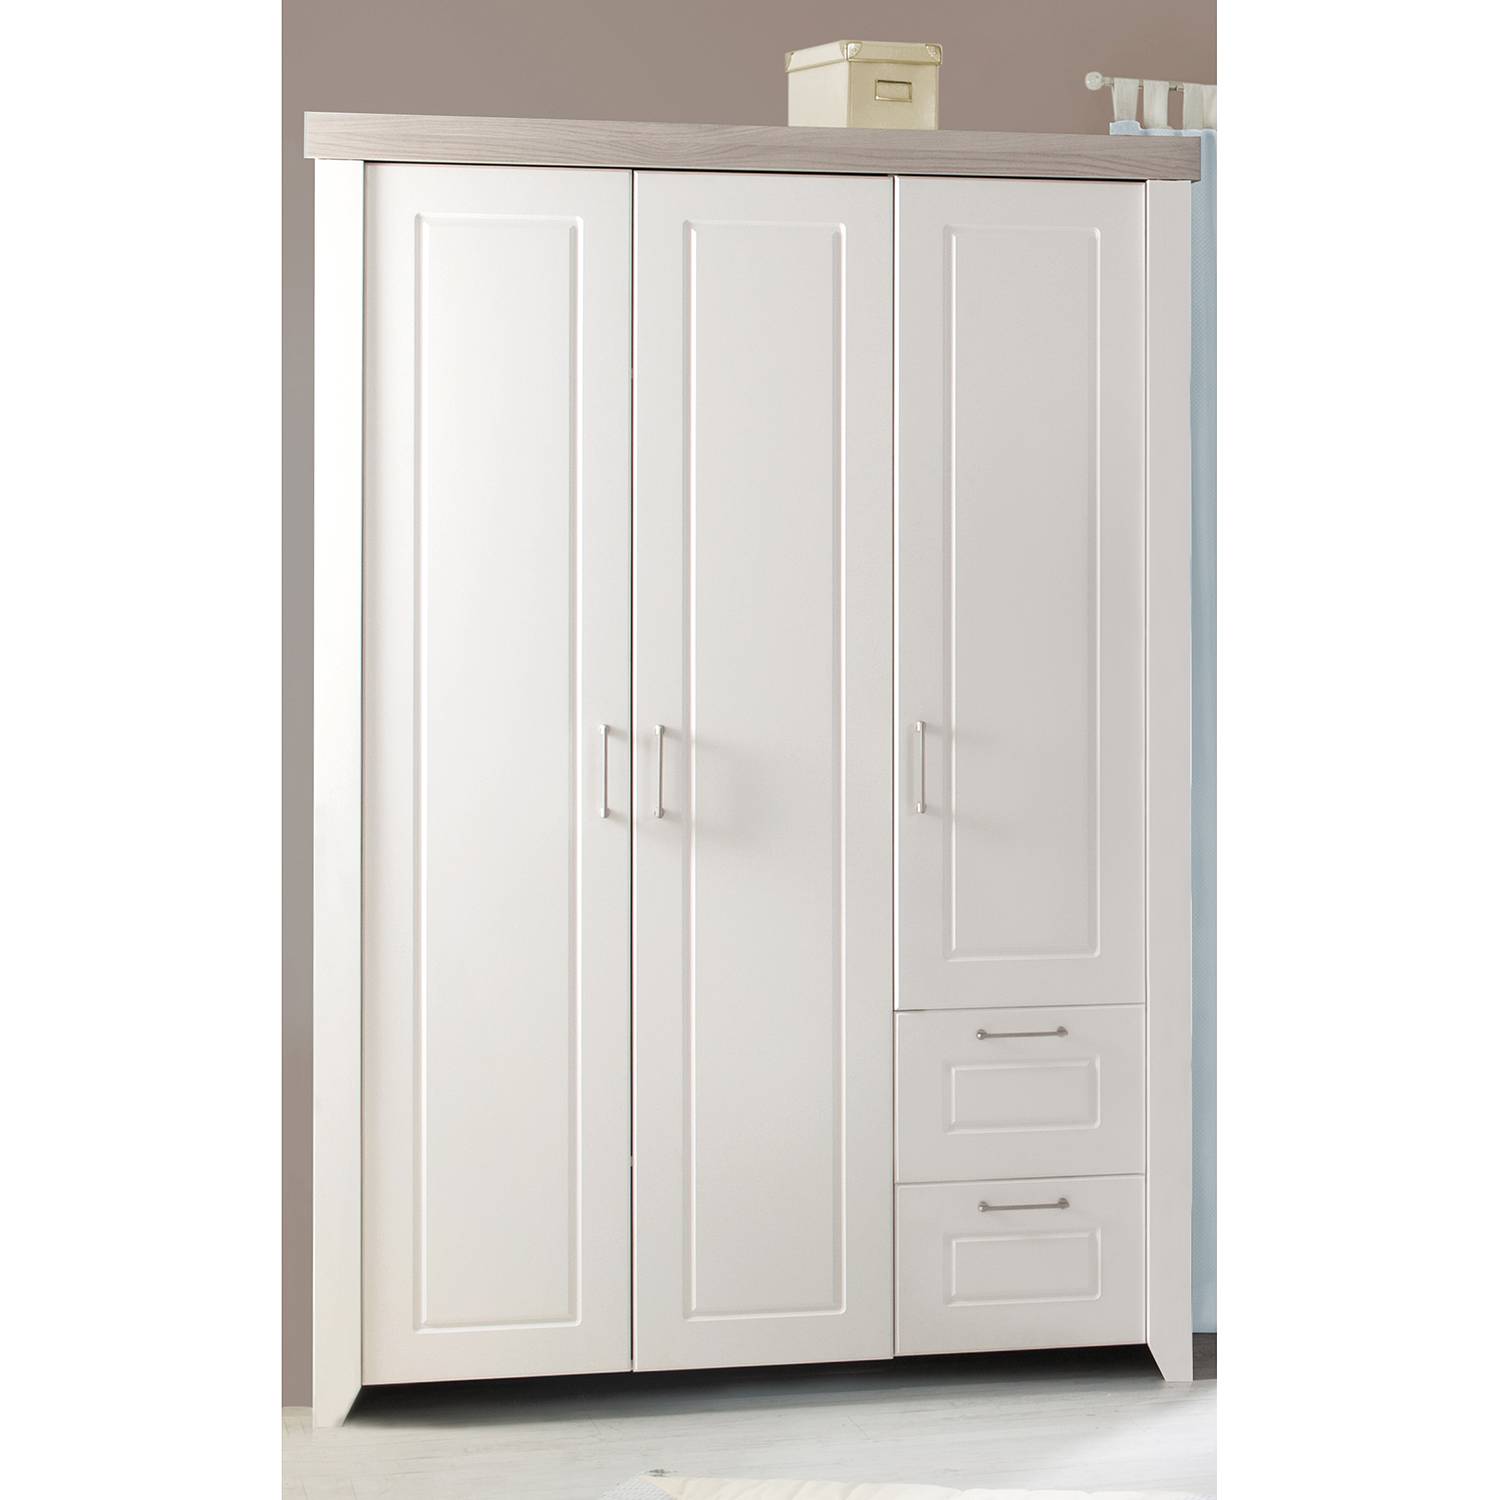 Image of Armoire Felicia 000000001000231674